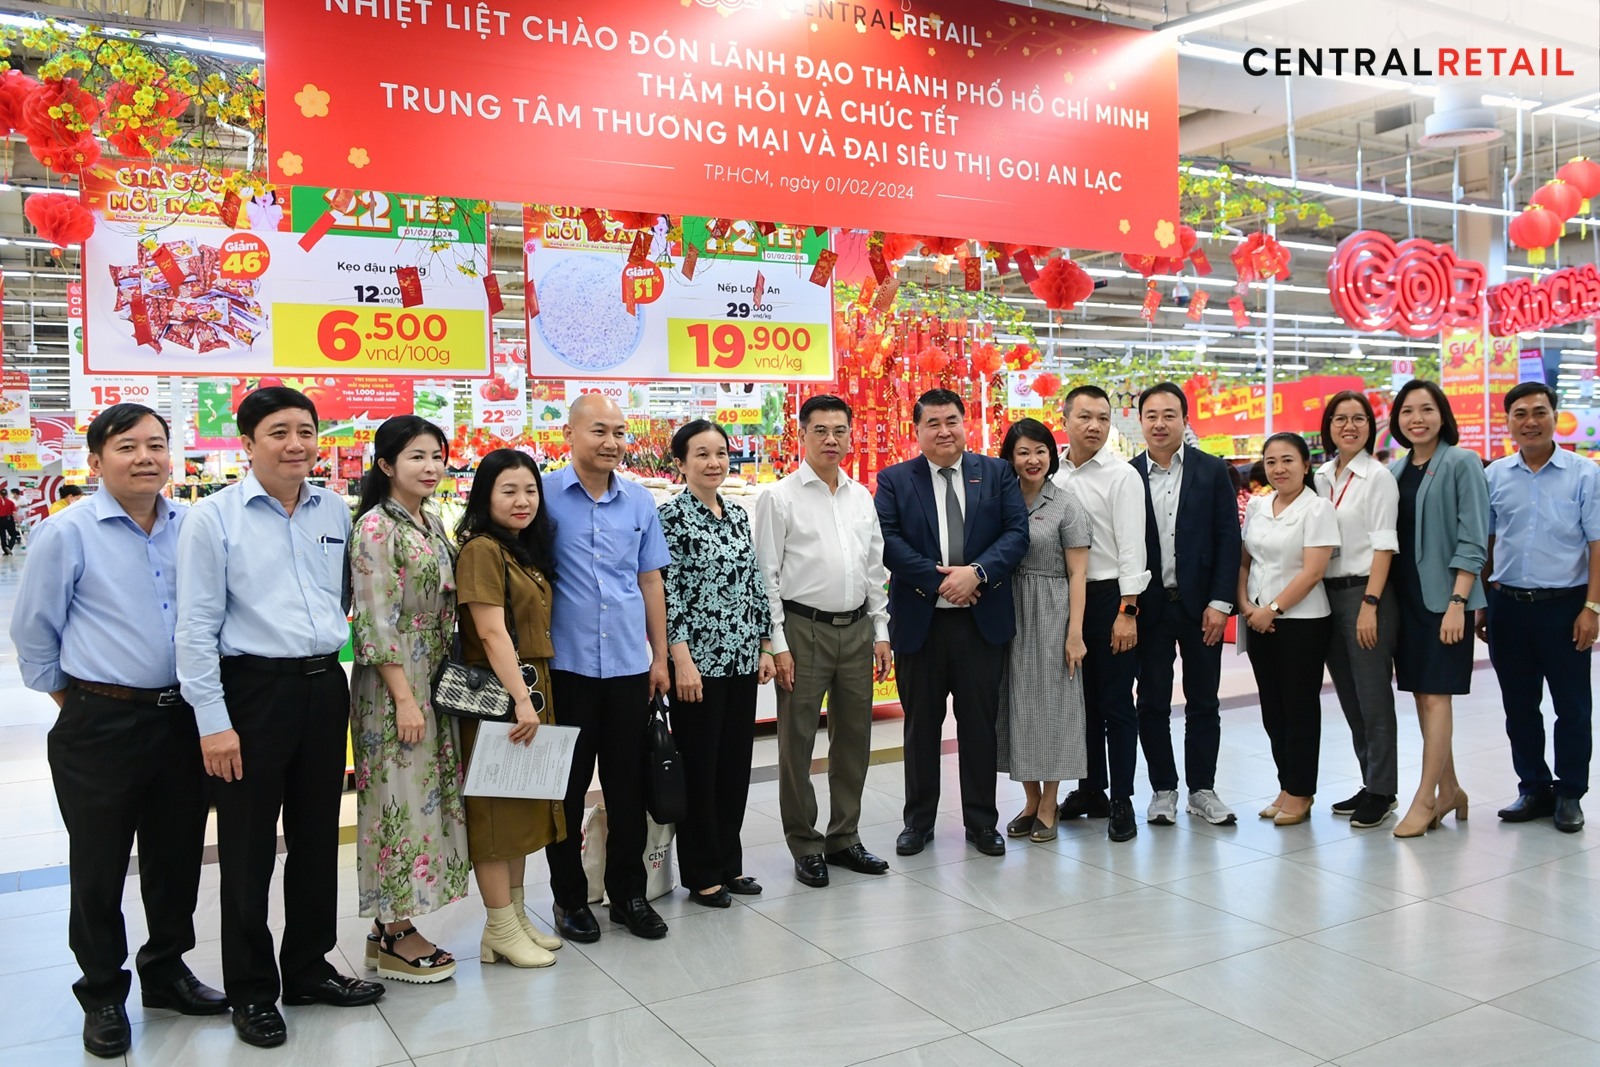 Central Retail Vietnam welcomed Vice Chairman of the Ho Chi Minh City People’s Committee to visit GO! Hypermarket